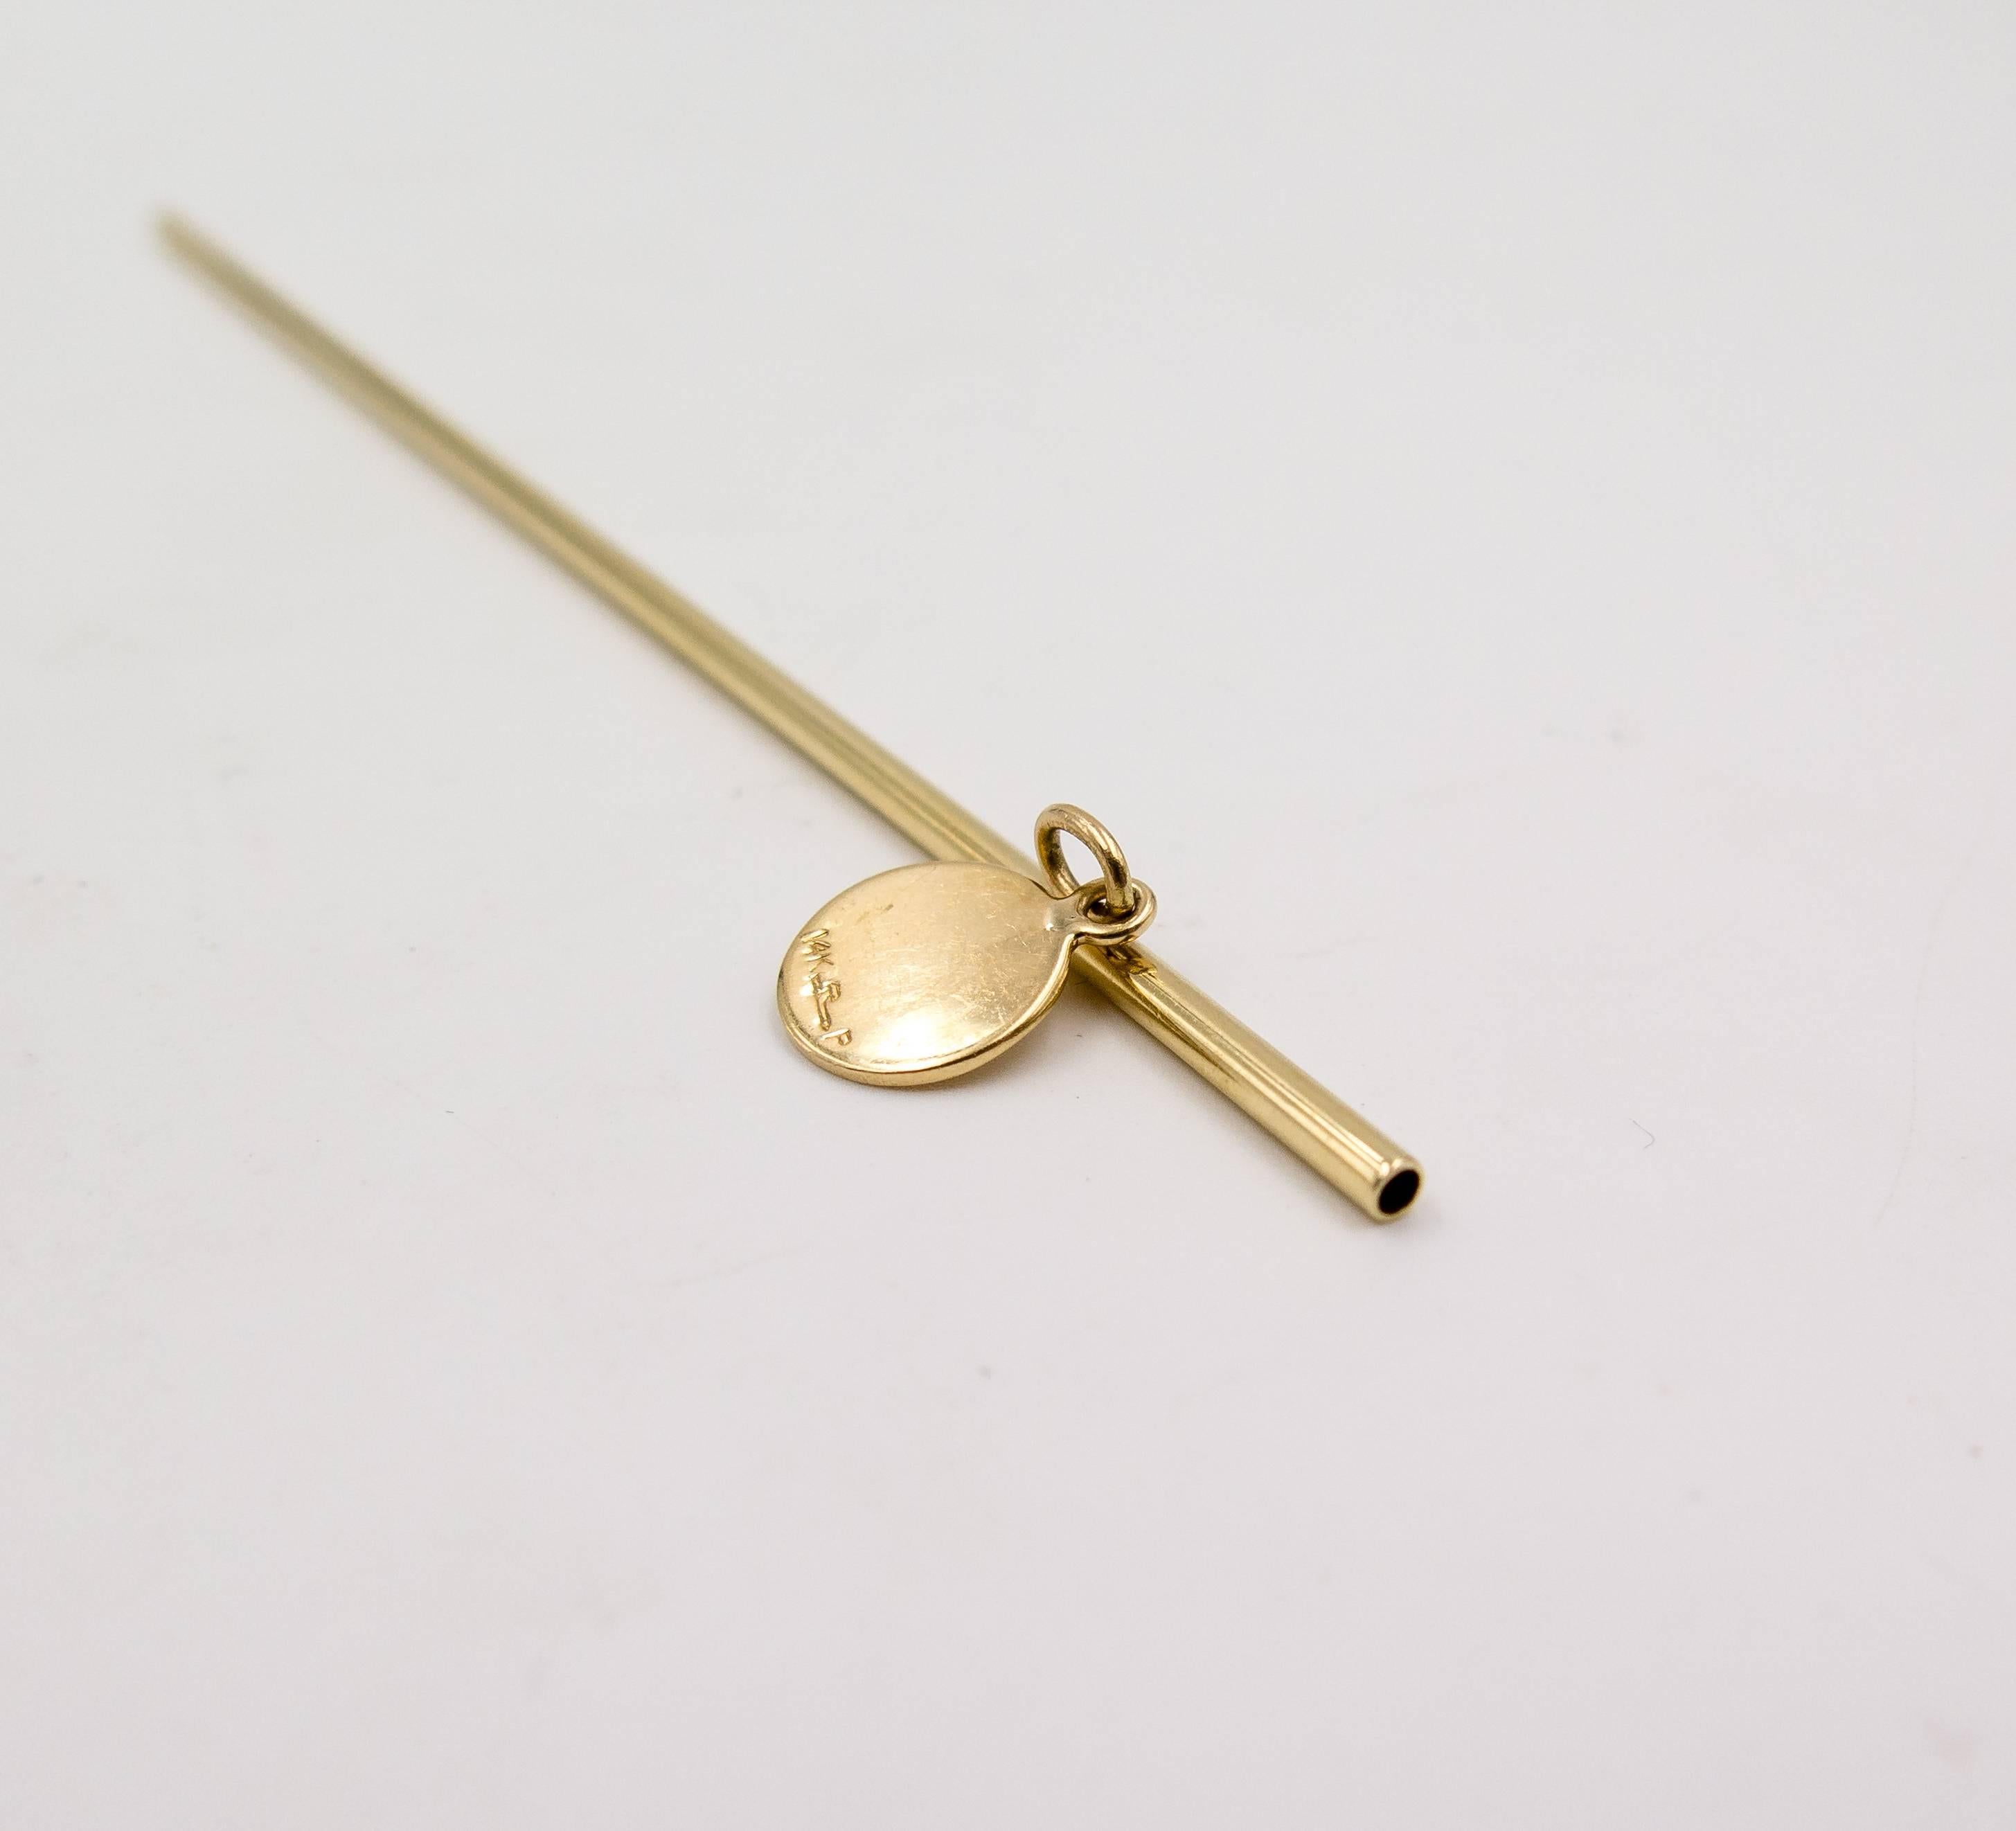   We doubt anyone these days requires a 14 karat gold straw, but isn't it a luxury to consider owning one?  This item measures 5 1/2